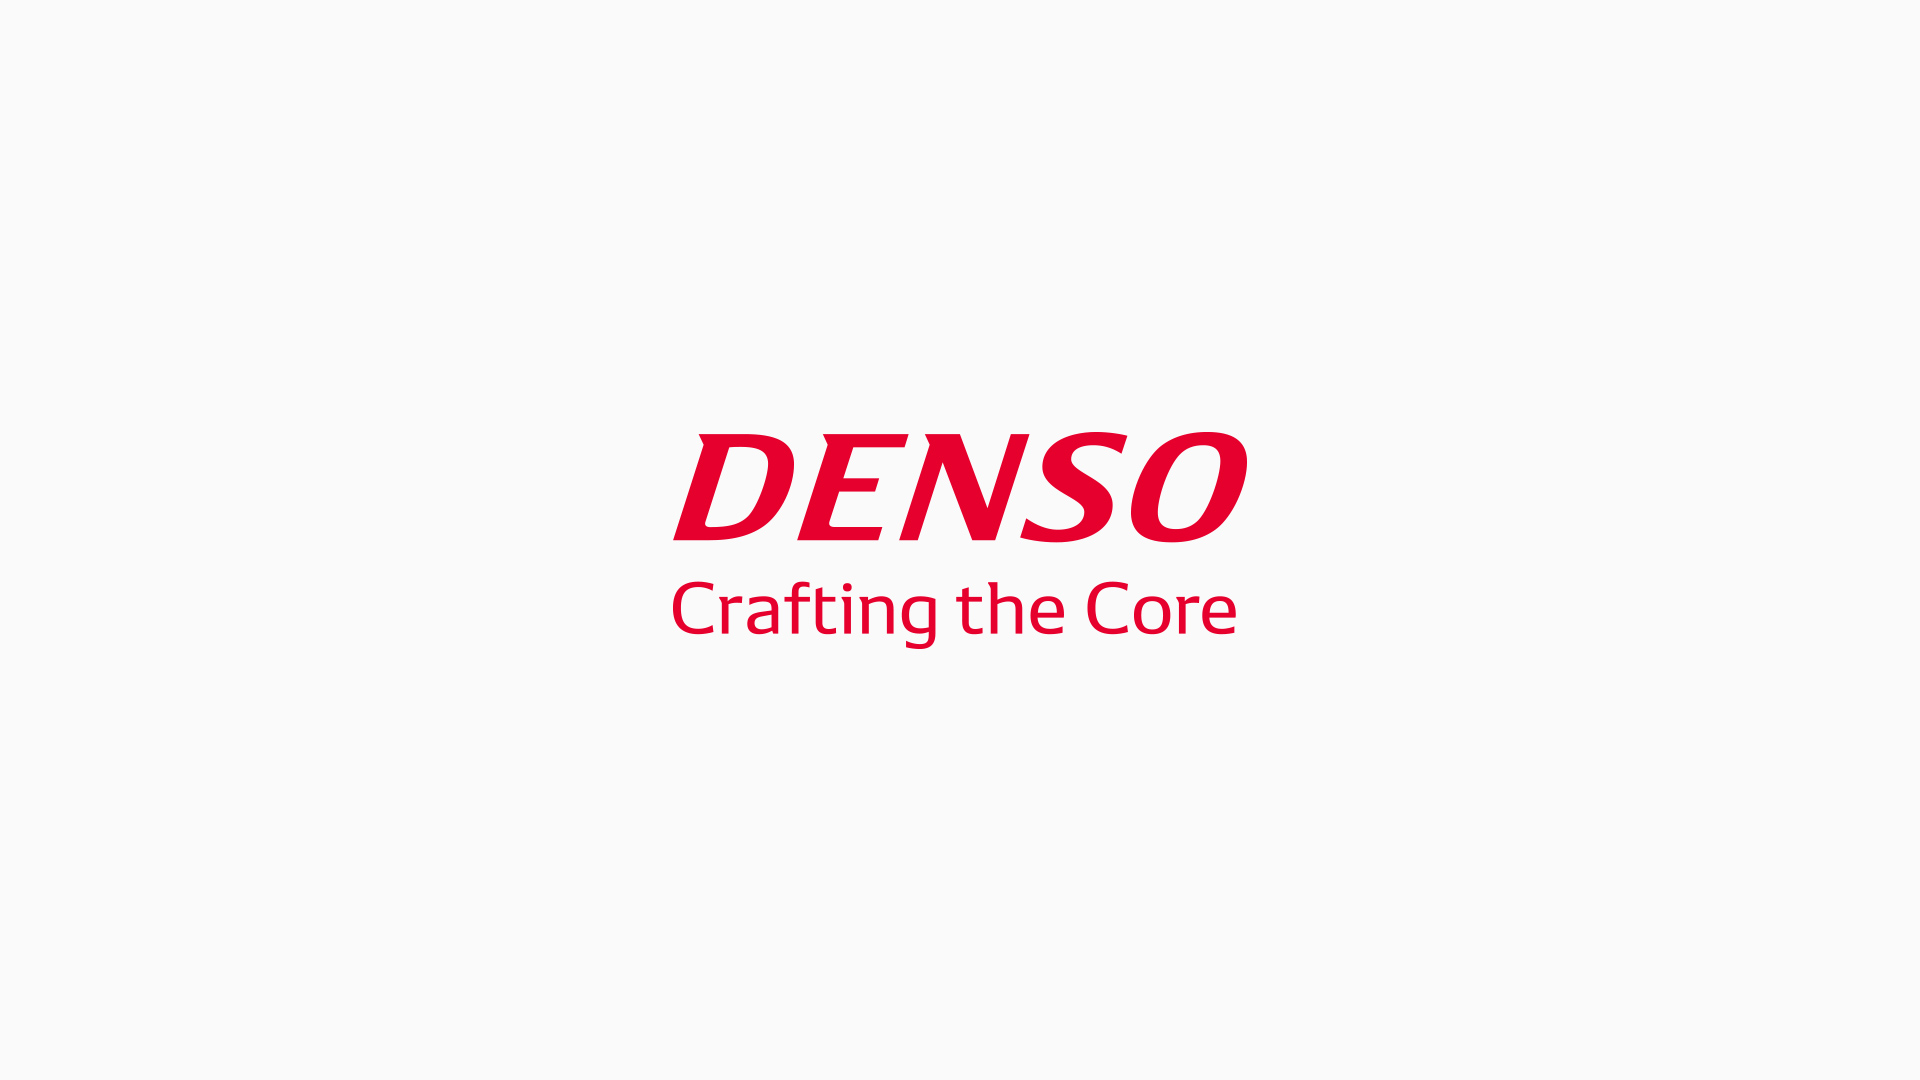 Women MAKE Awards Recognize DENSO Engineer for Excellence in Manufacturing | News | News